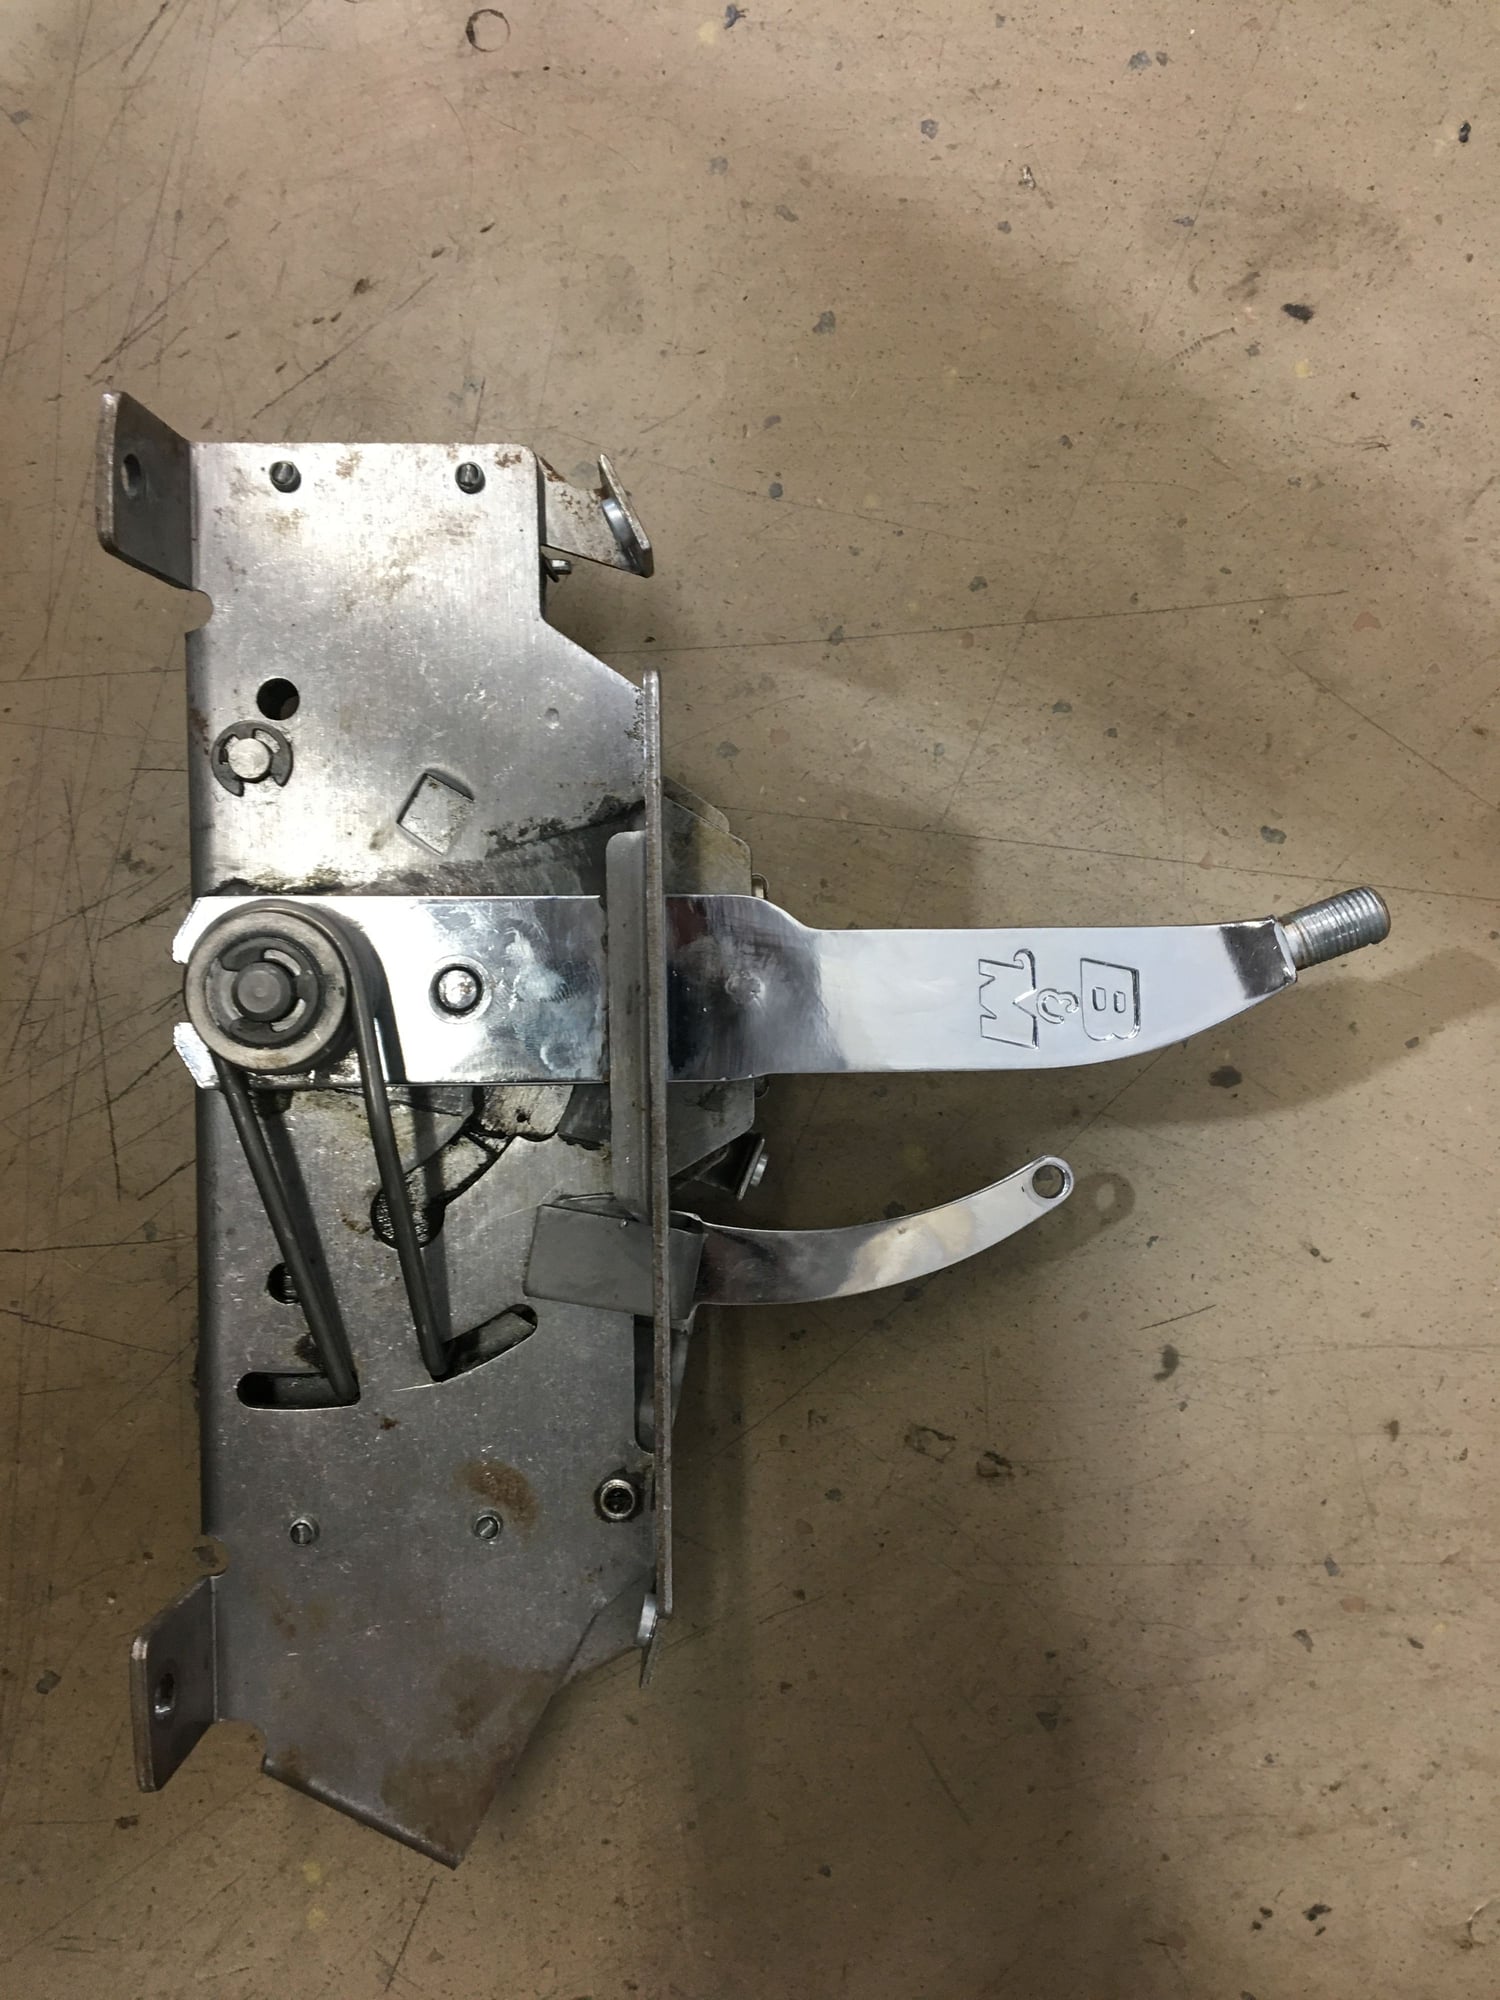 Miscellaneous - B&m pro ratchet shifter - Used - All Years Any Make All Models - Houston, TX 77065, United States